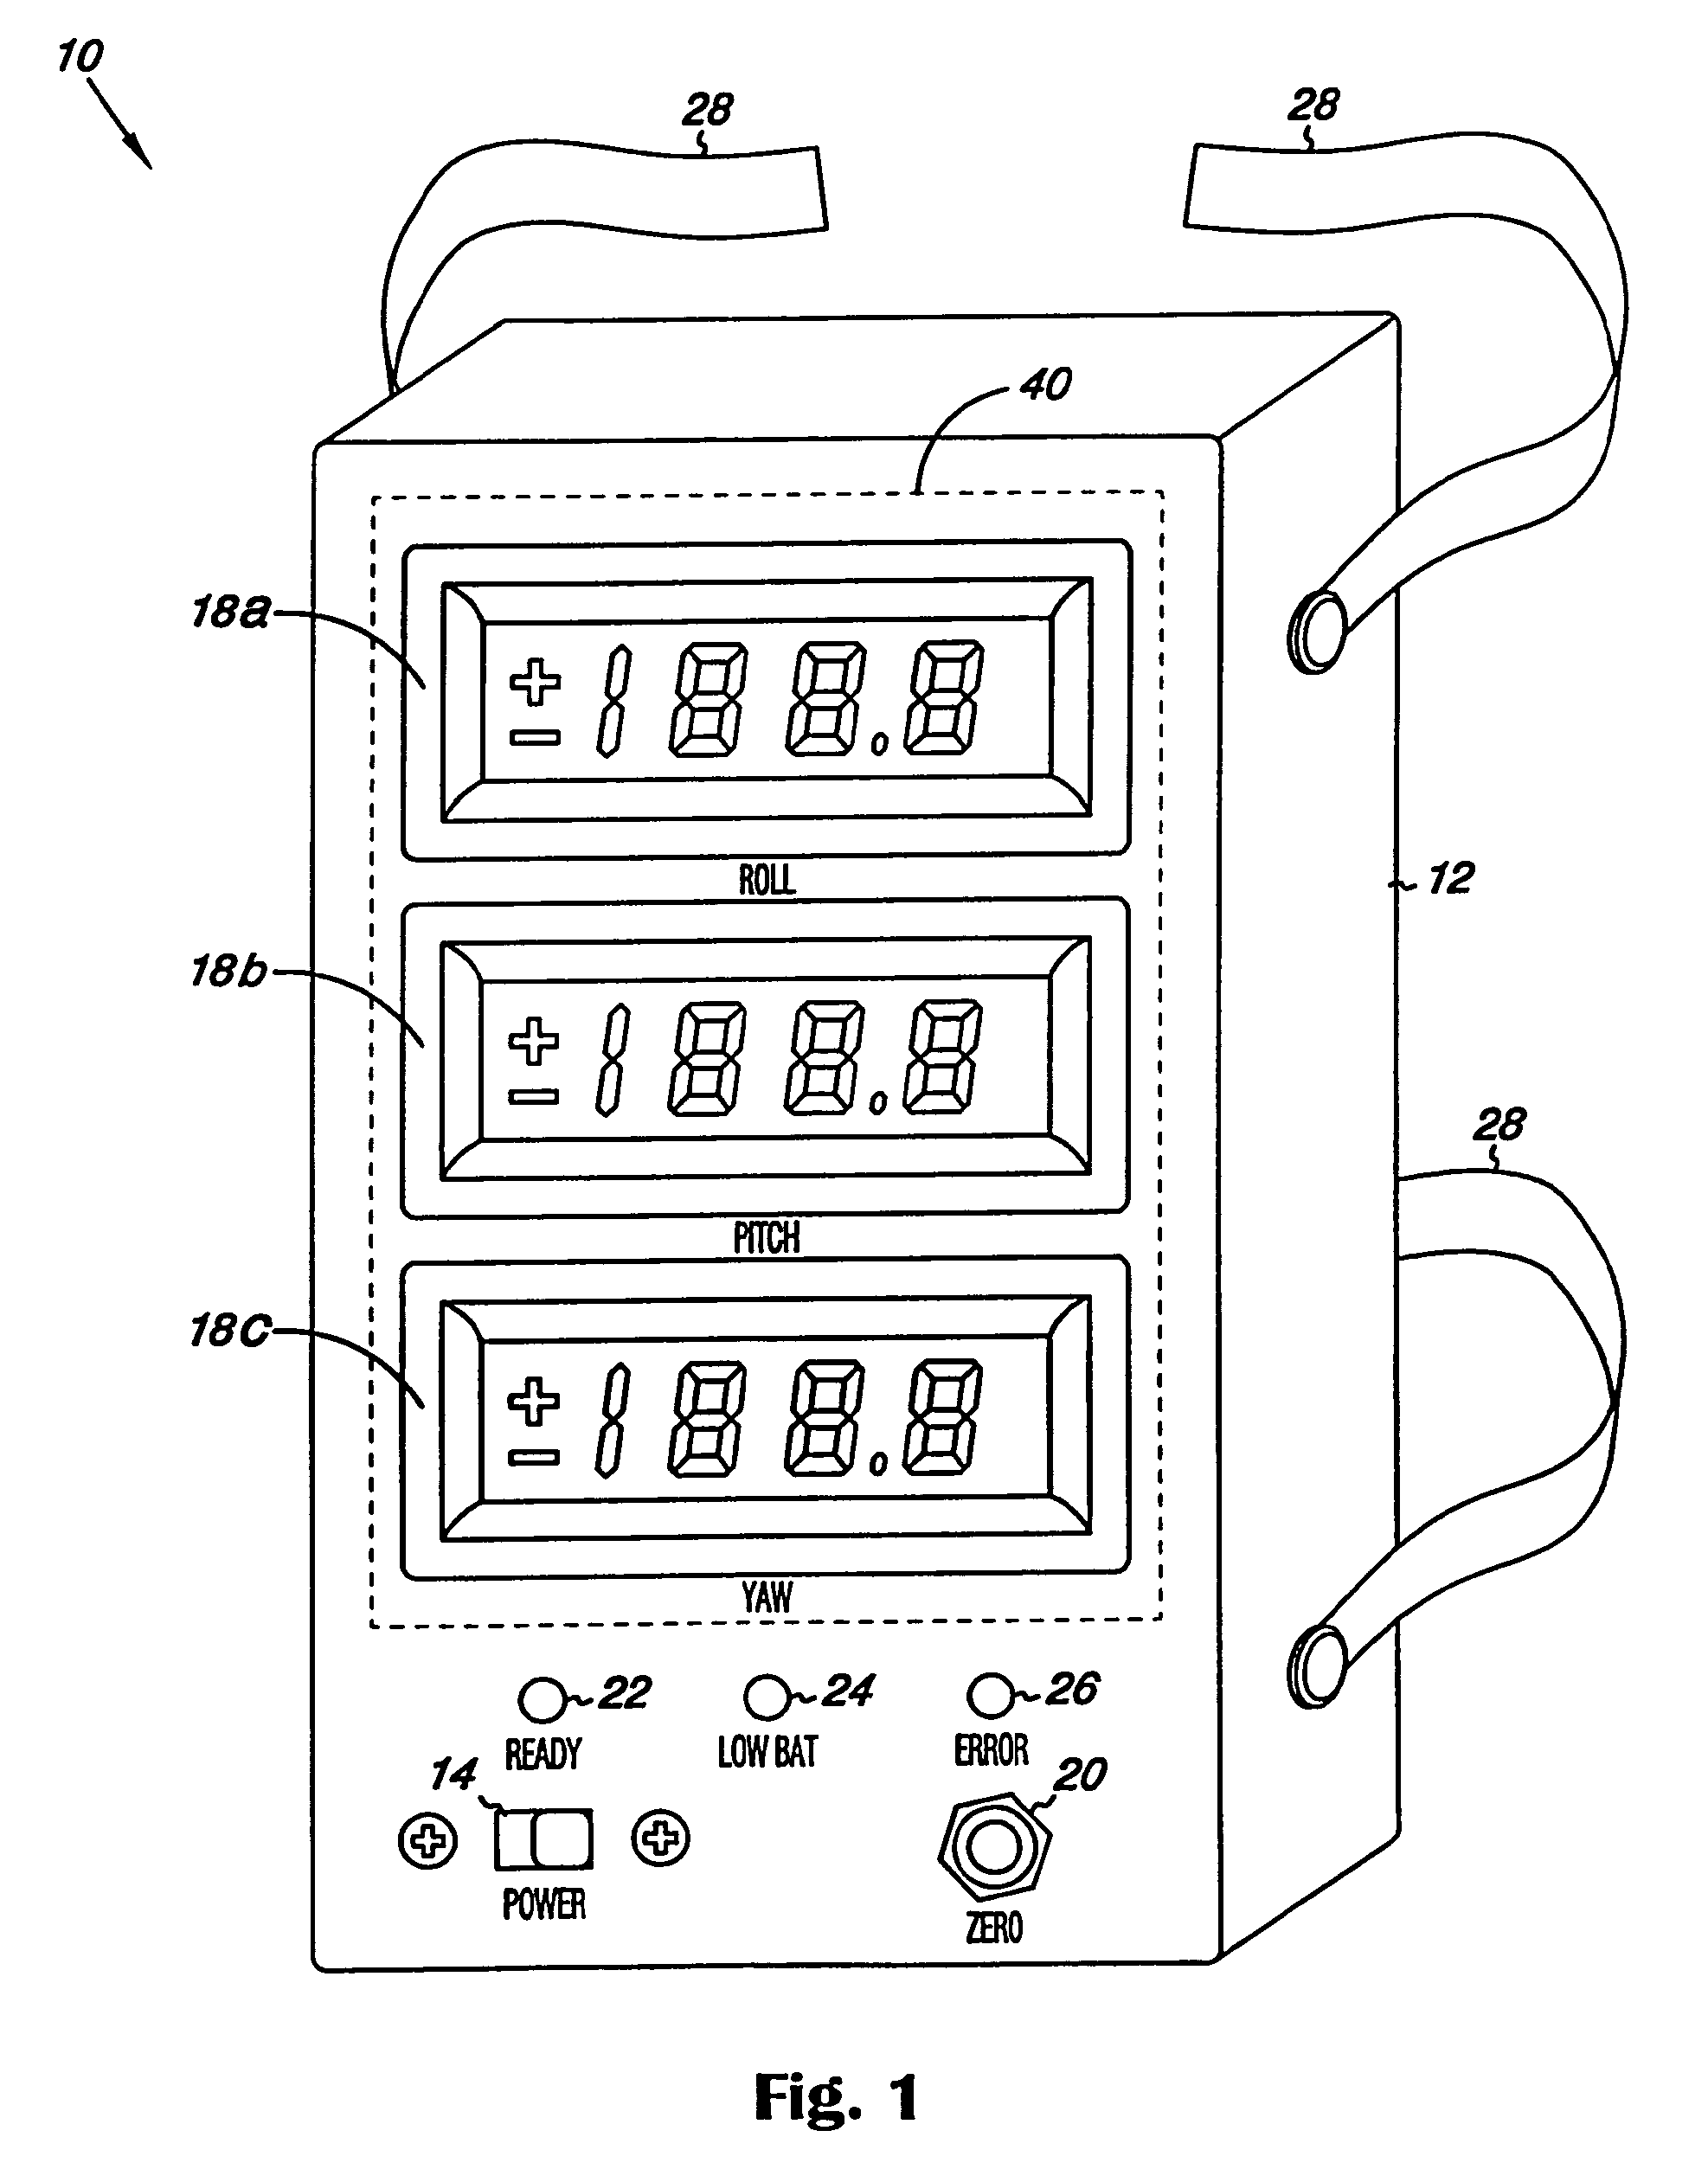 Surgical orientation system and method